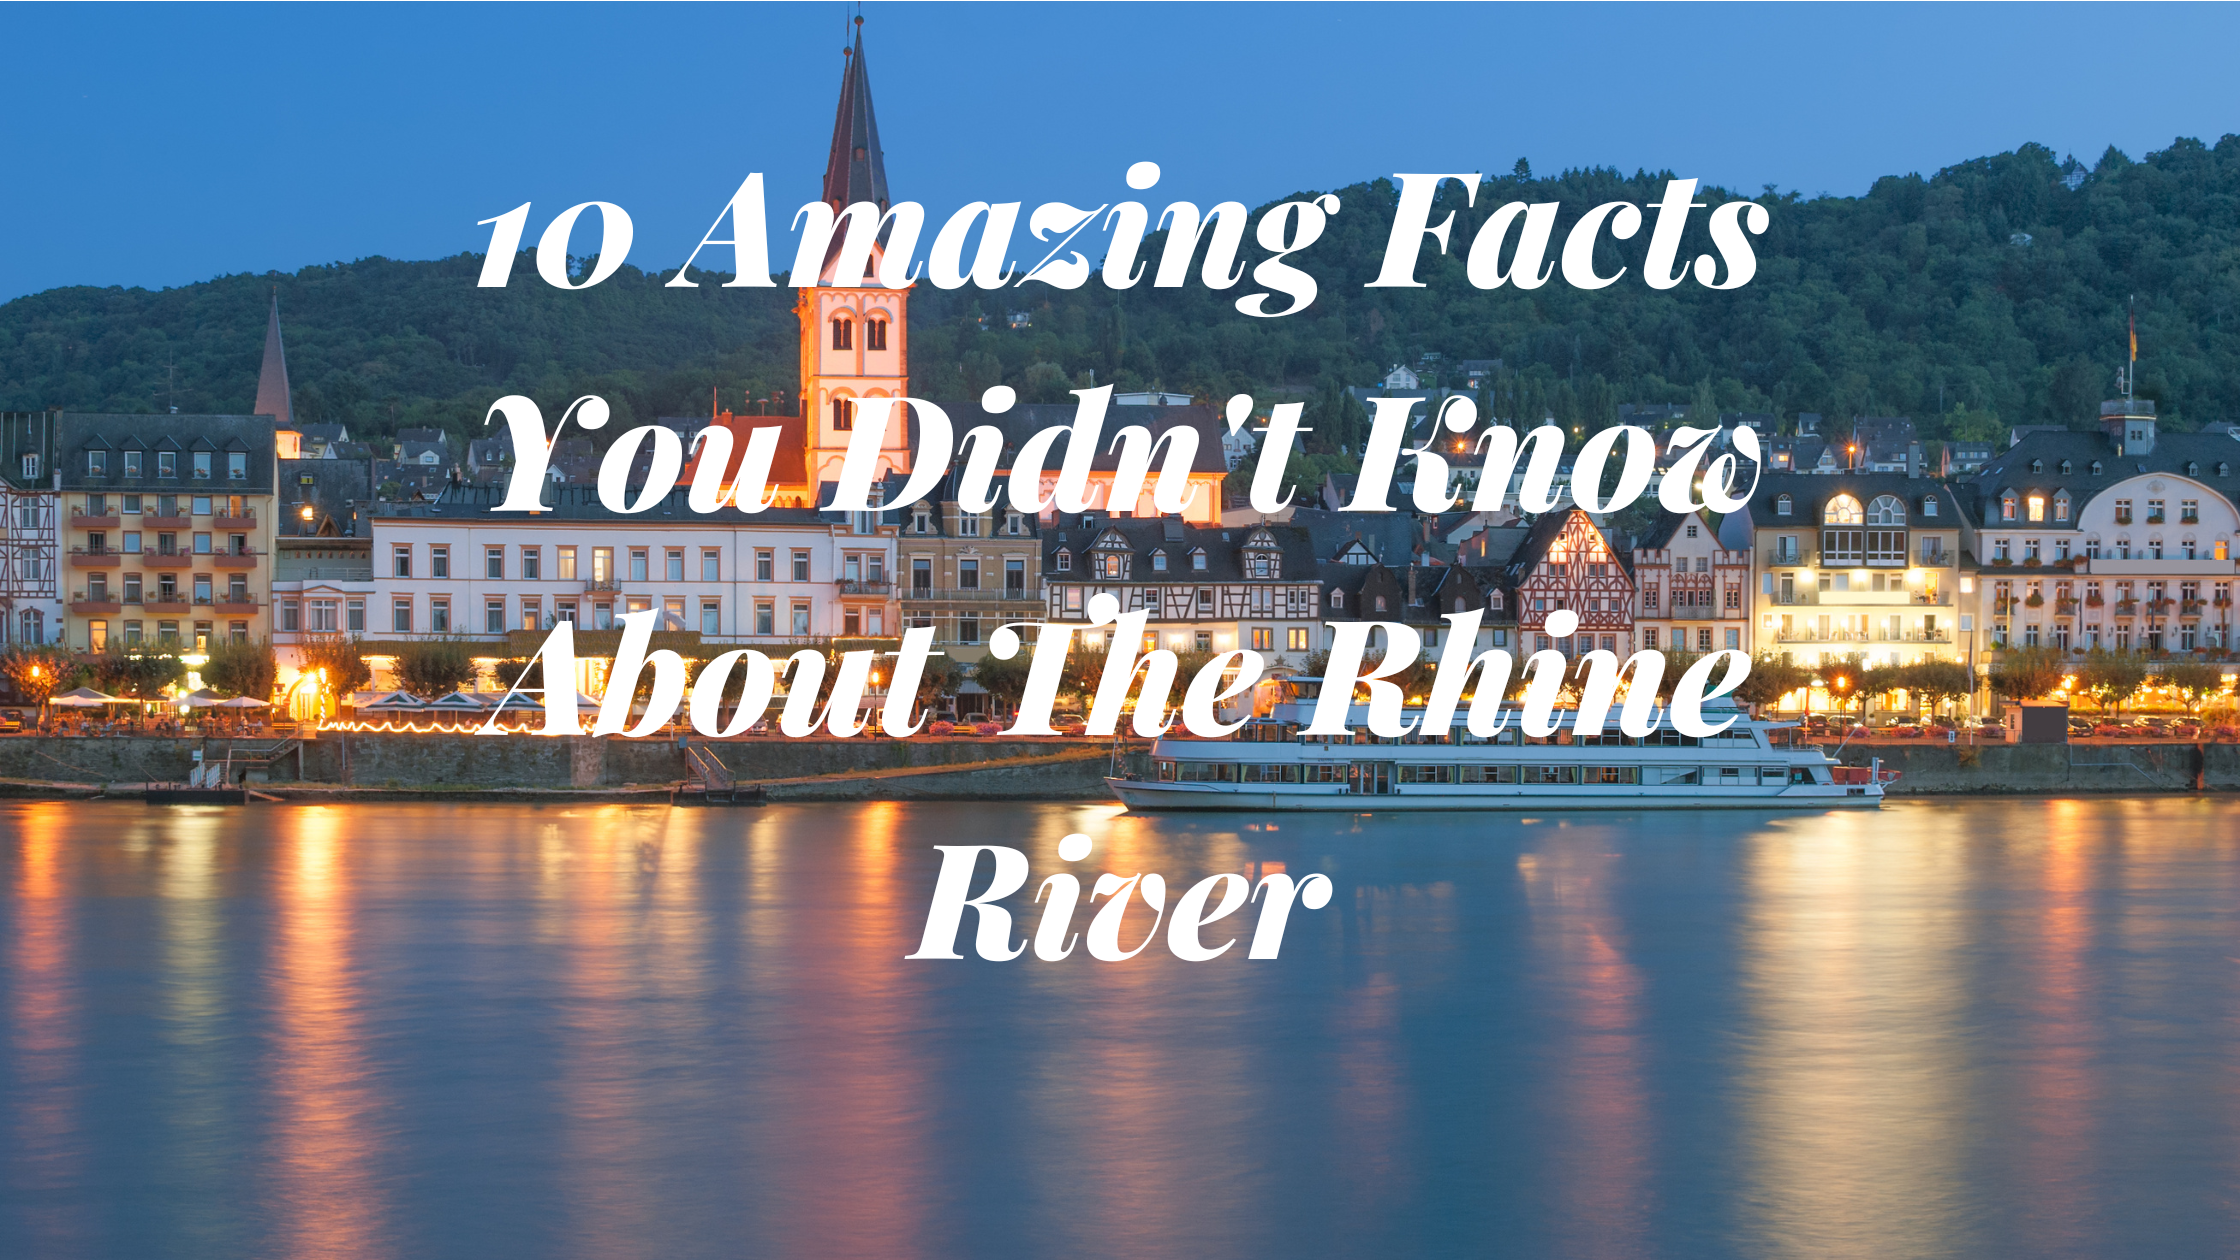 10 Amazing Facts You Didn’t Know About The Rhine River